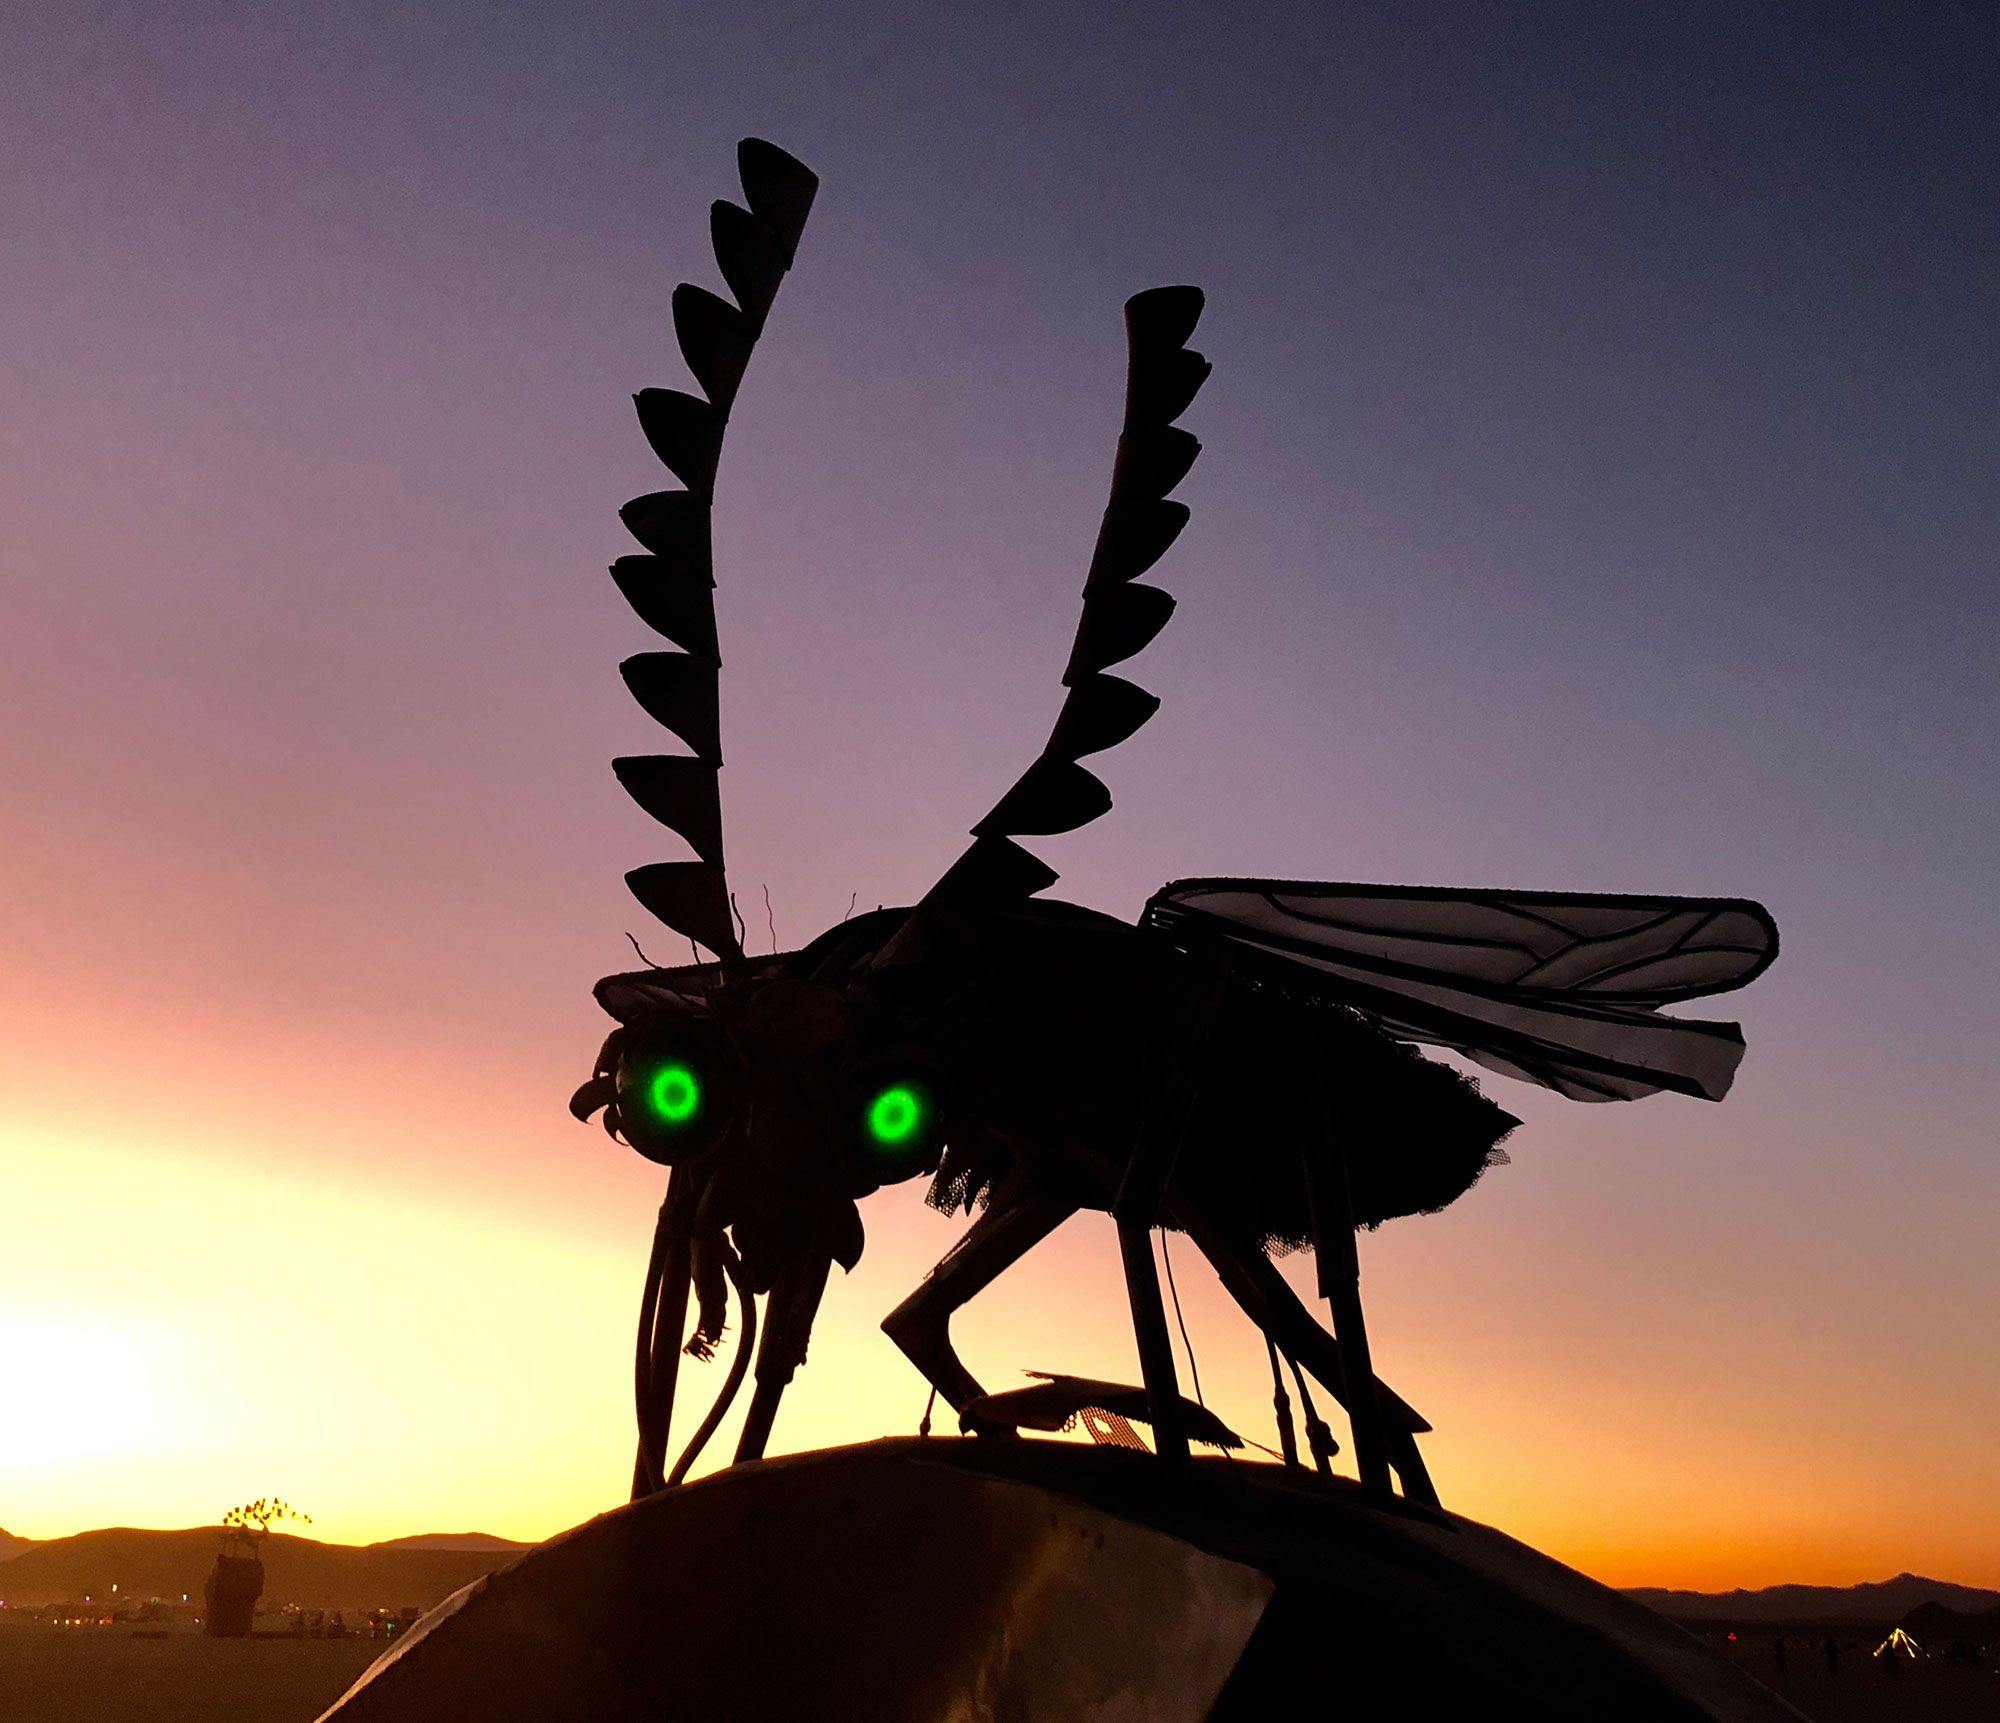 Flaming and LED-lit fireflies created by the Flaming Lotus Girls will be on display at Maker Faire.